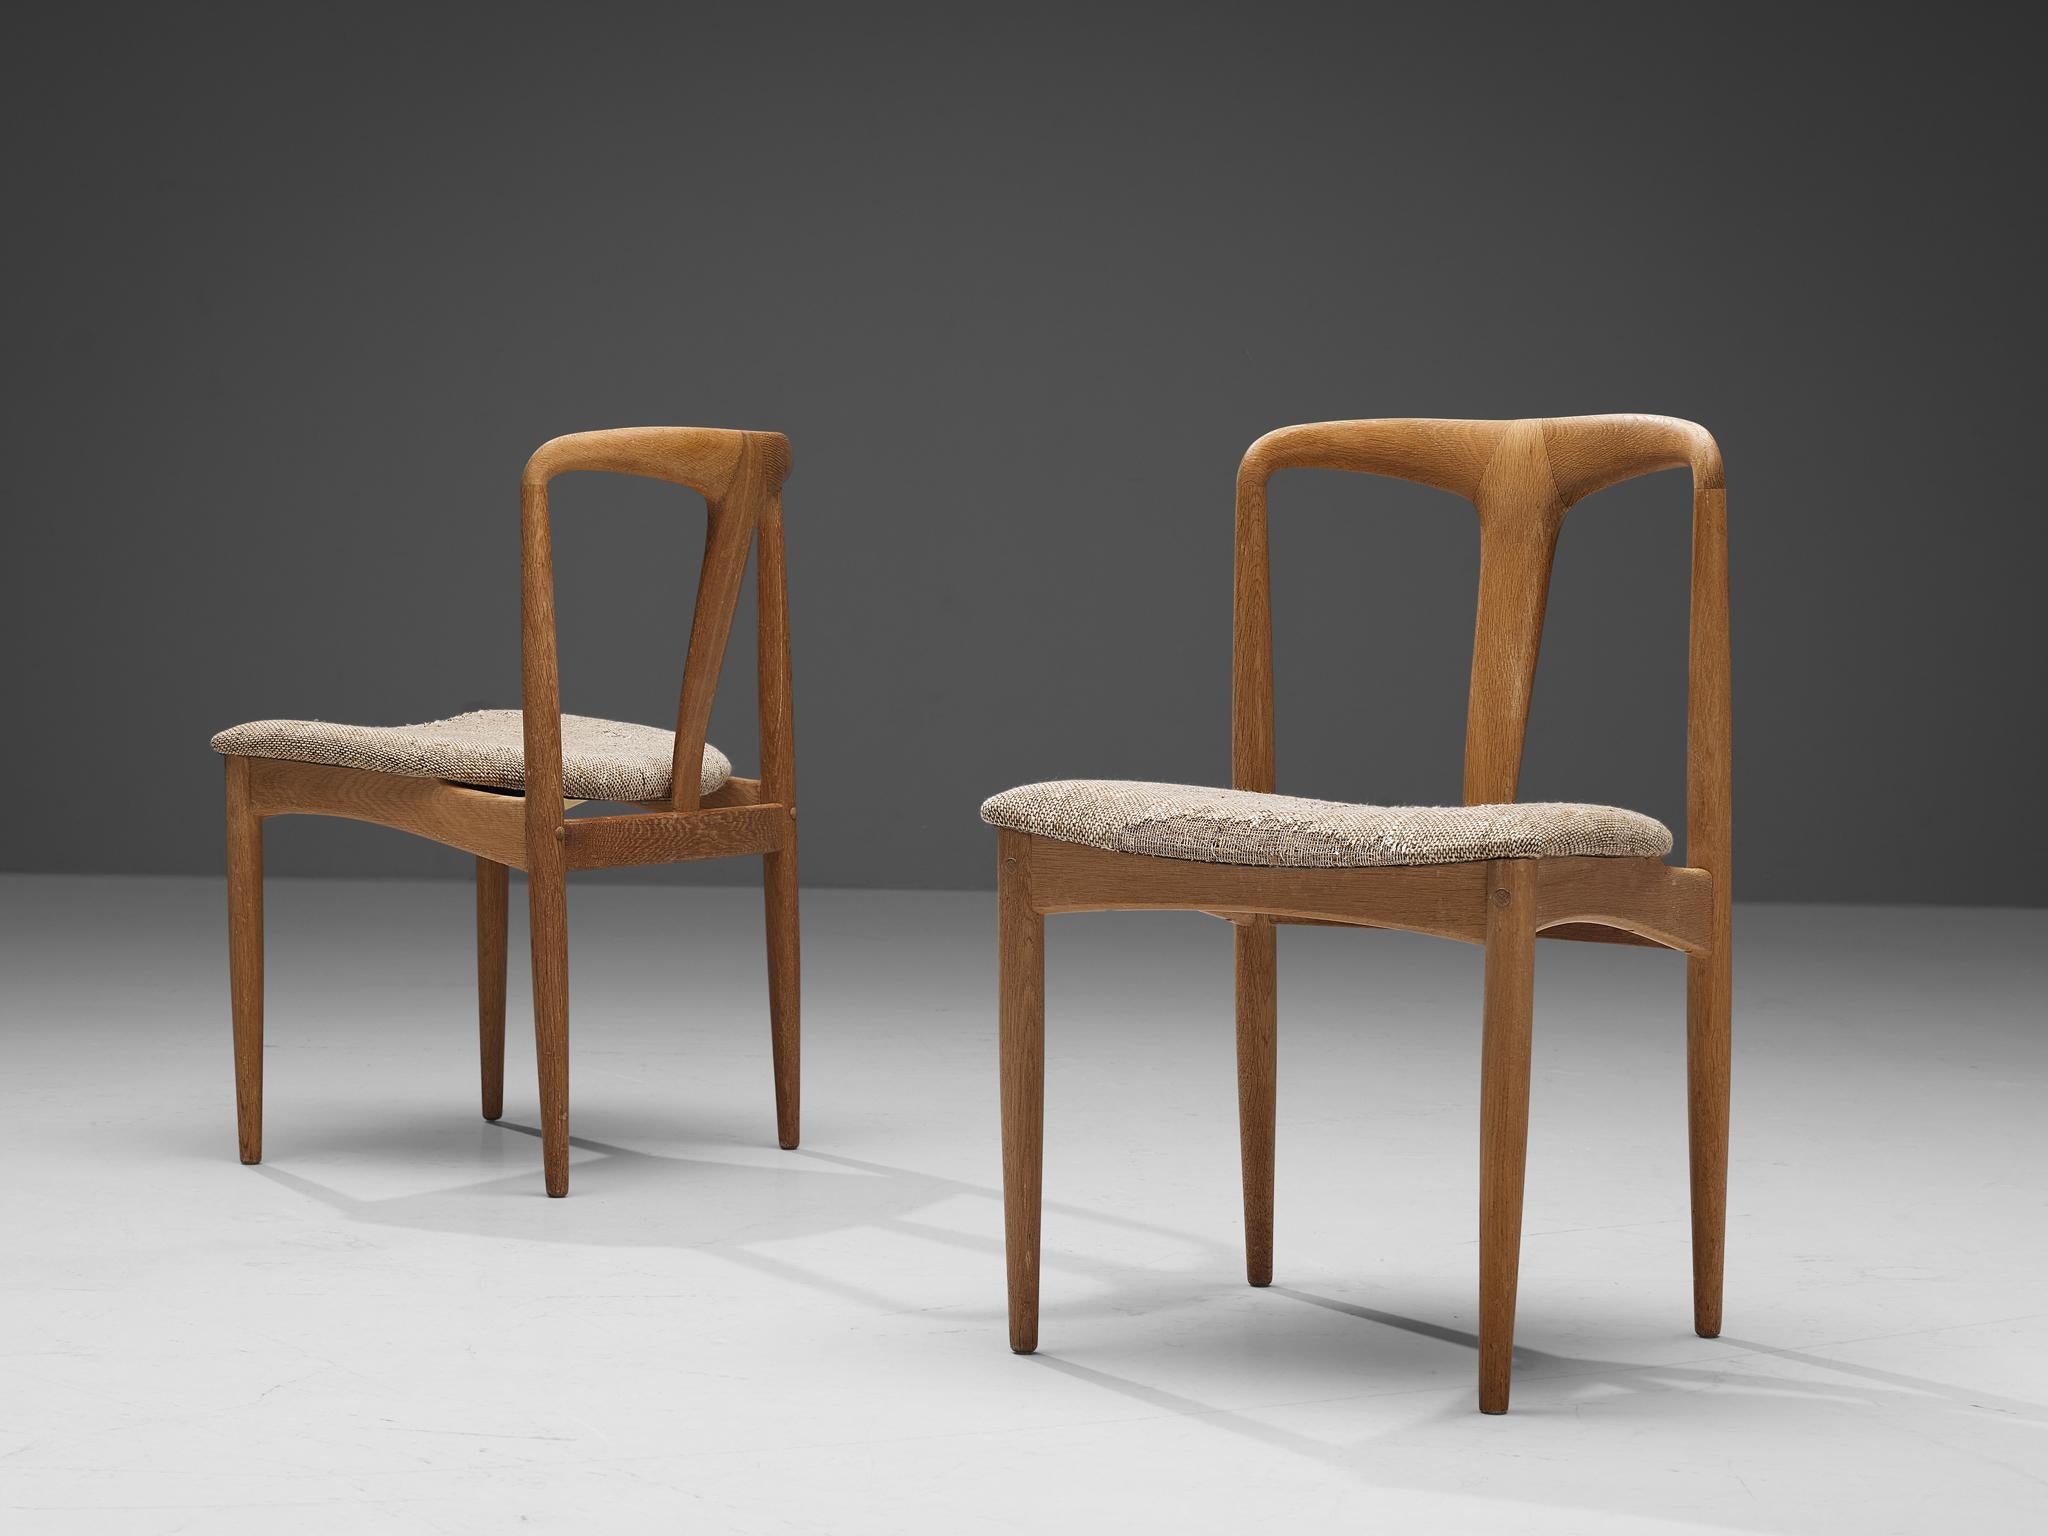 Johannes Andersen for Uldum Møbelfabrik, pair of chairs ‘Juliane’, oak, fabric, Denmark, 1960s

This pair of dining chairs is designed by Danish designer Johannes Andersen and produced by Uldum Møbelfabrik in Denmark. The chairs are executed in oak